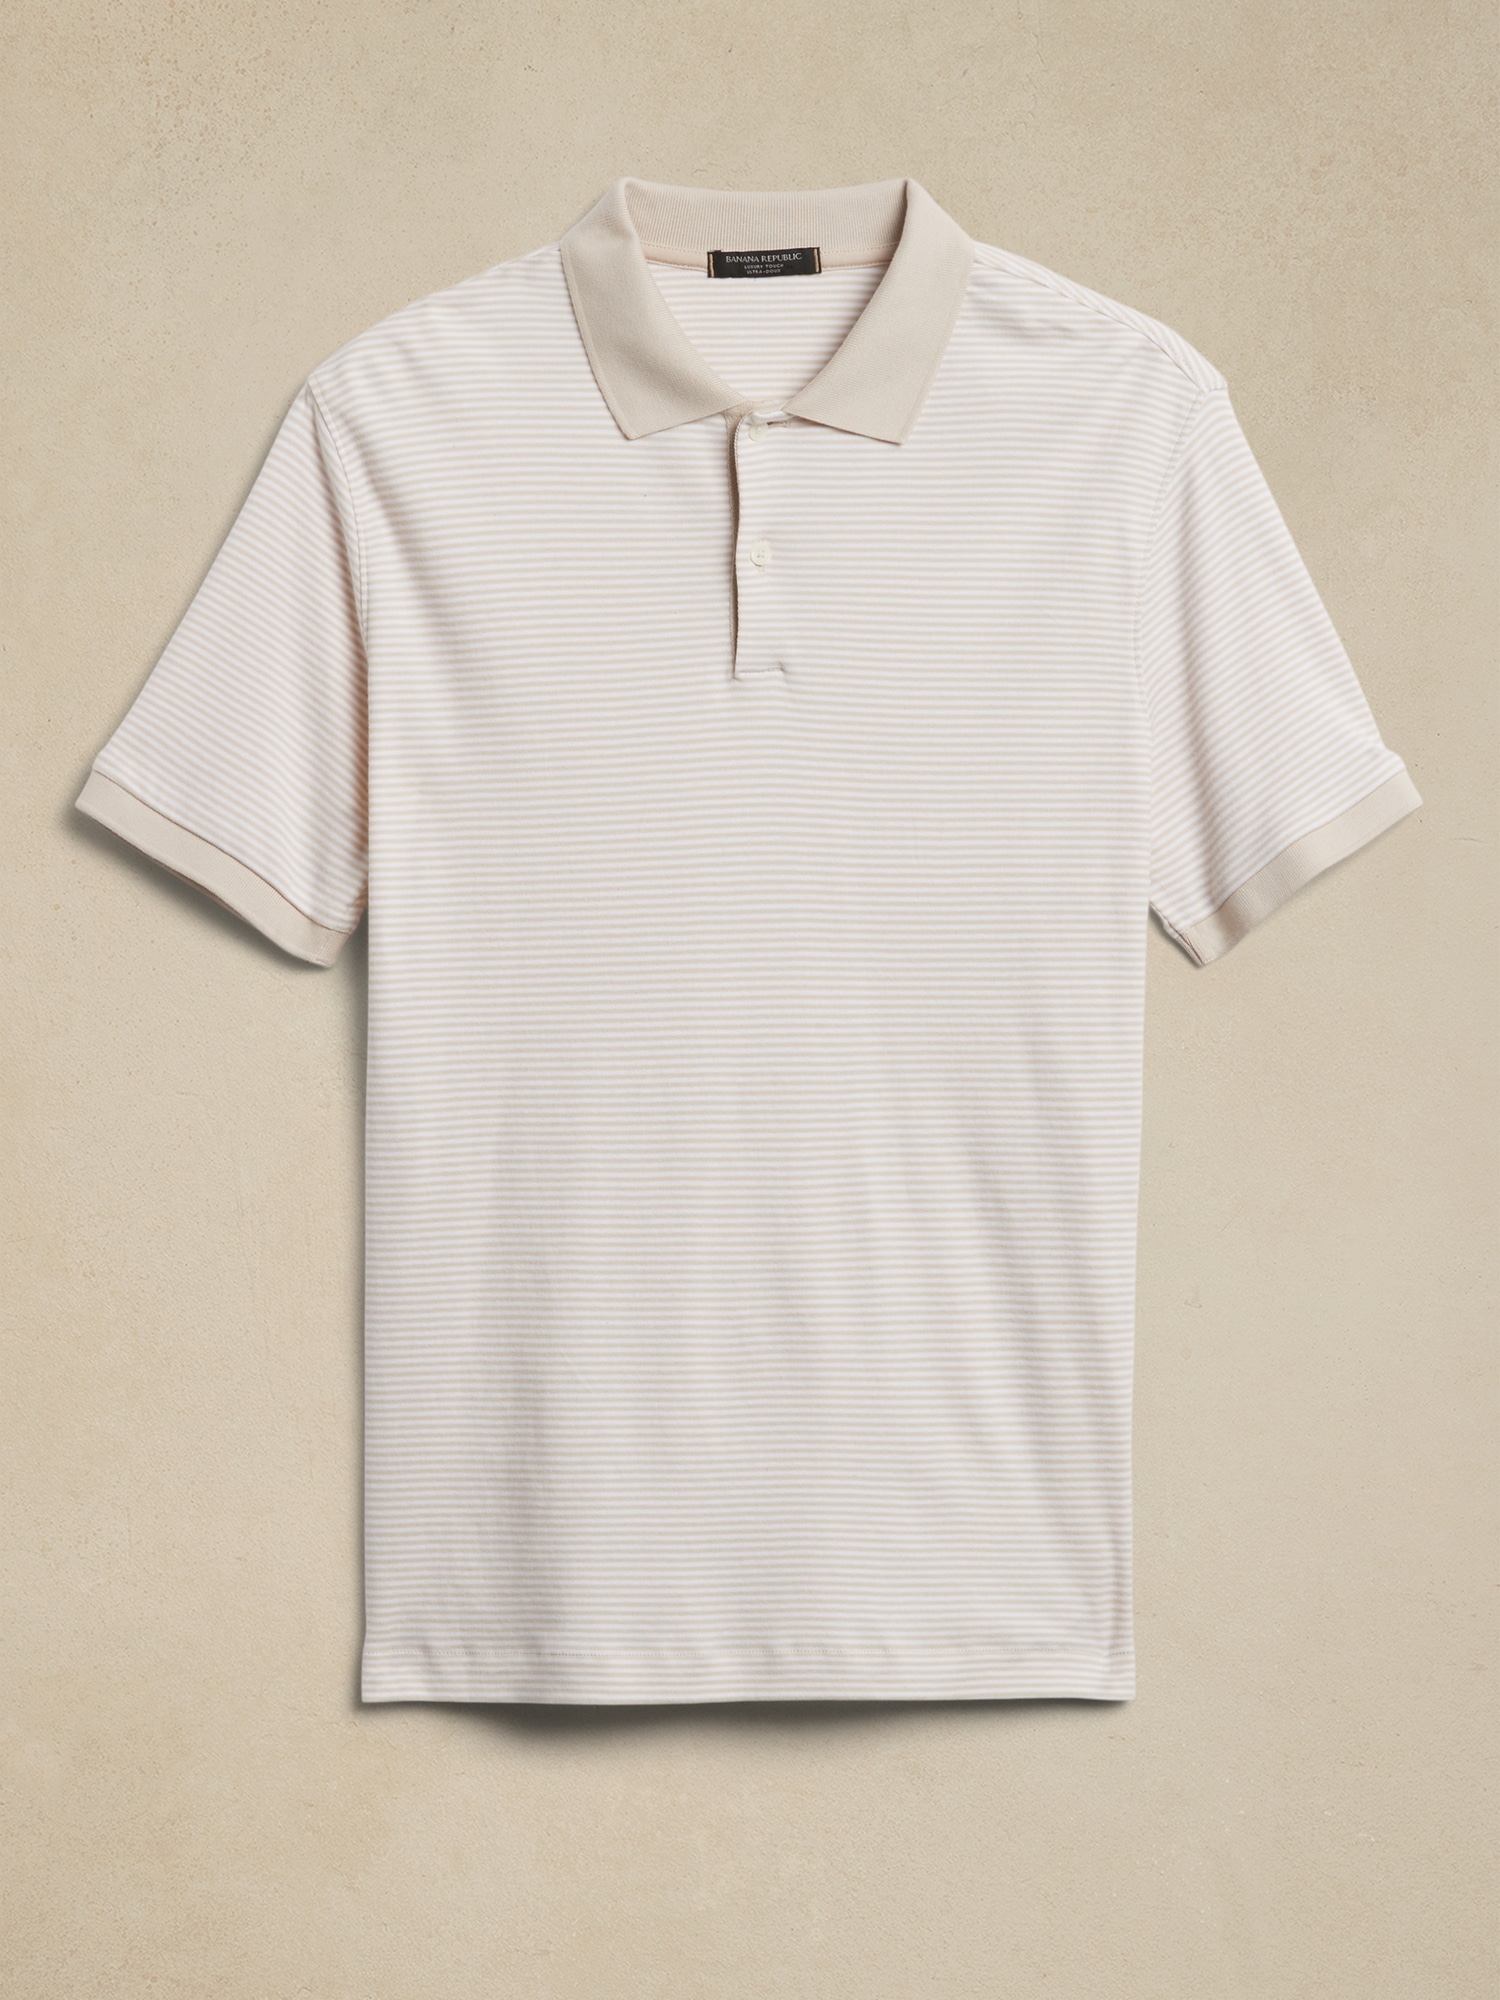 Review: Banana Republic Luxury Touch Polo [4 Years Later]